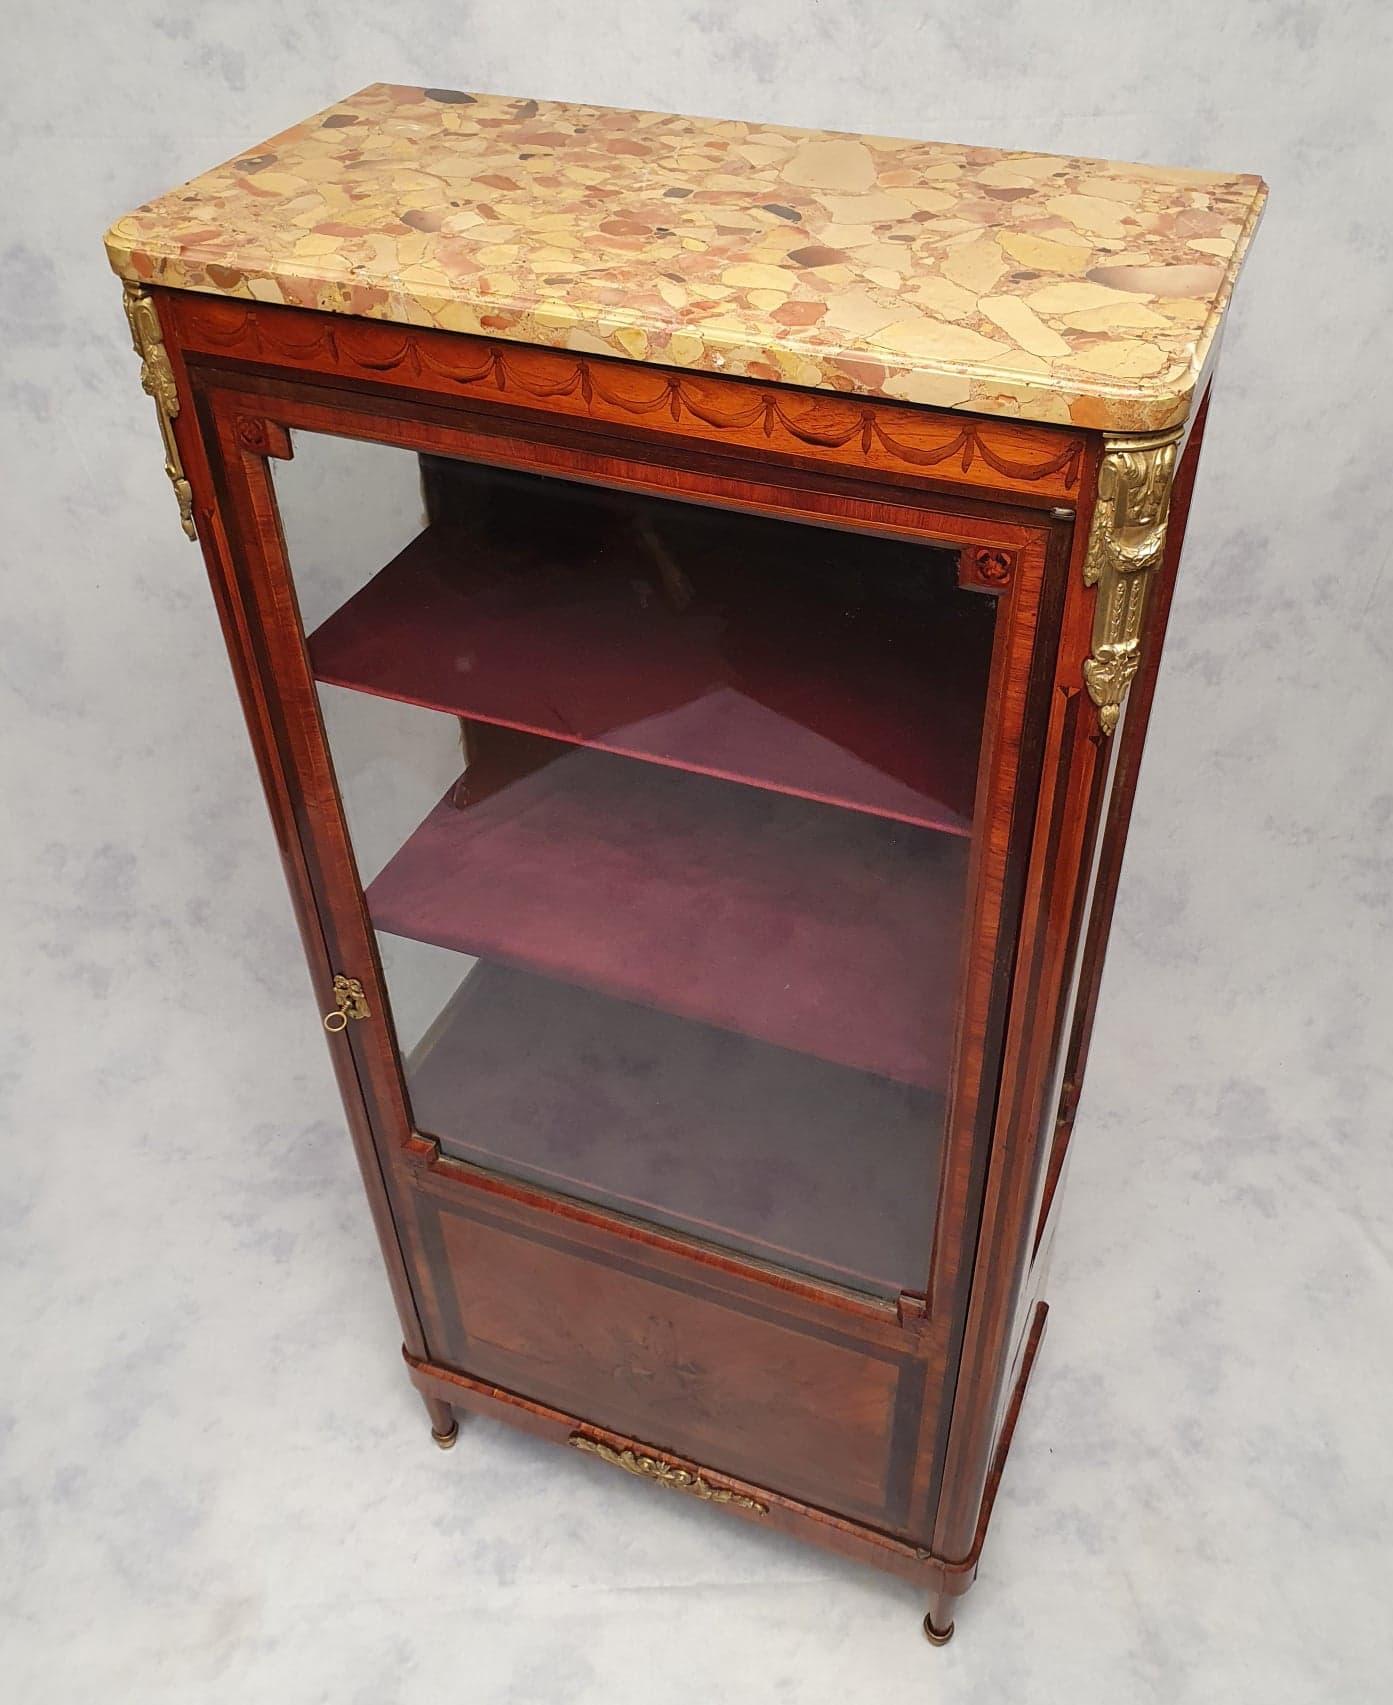 Louis XVI style showcase from the early 19th century. It presents a beautiful marquetry on the facade as on the ribs. The hunting trophy decorations of this marquetry are of good quality. In addition, a garland marquetry is on the top rail. Most of